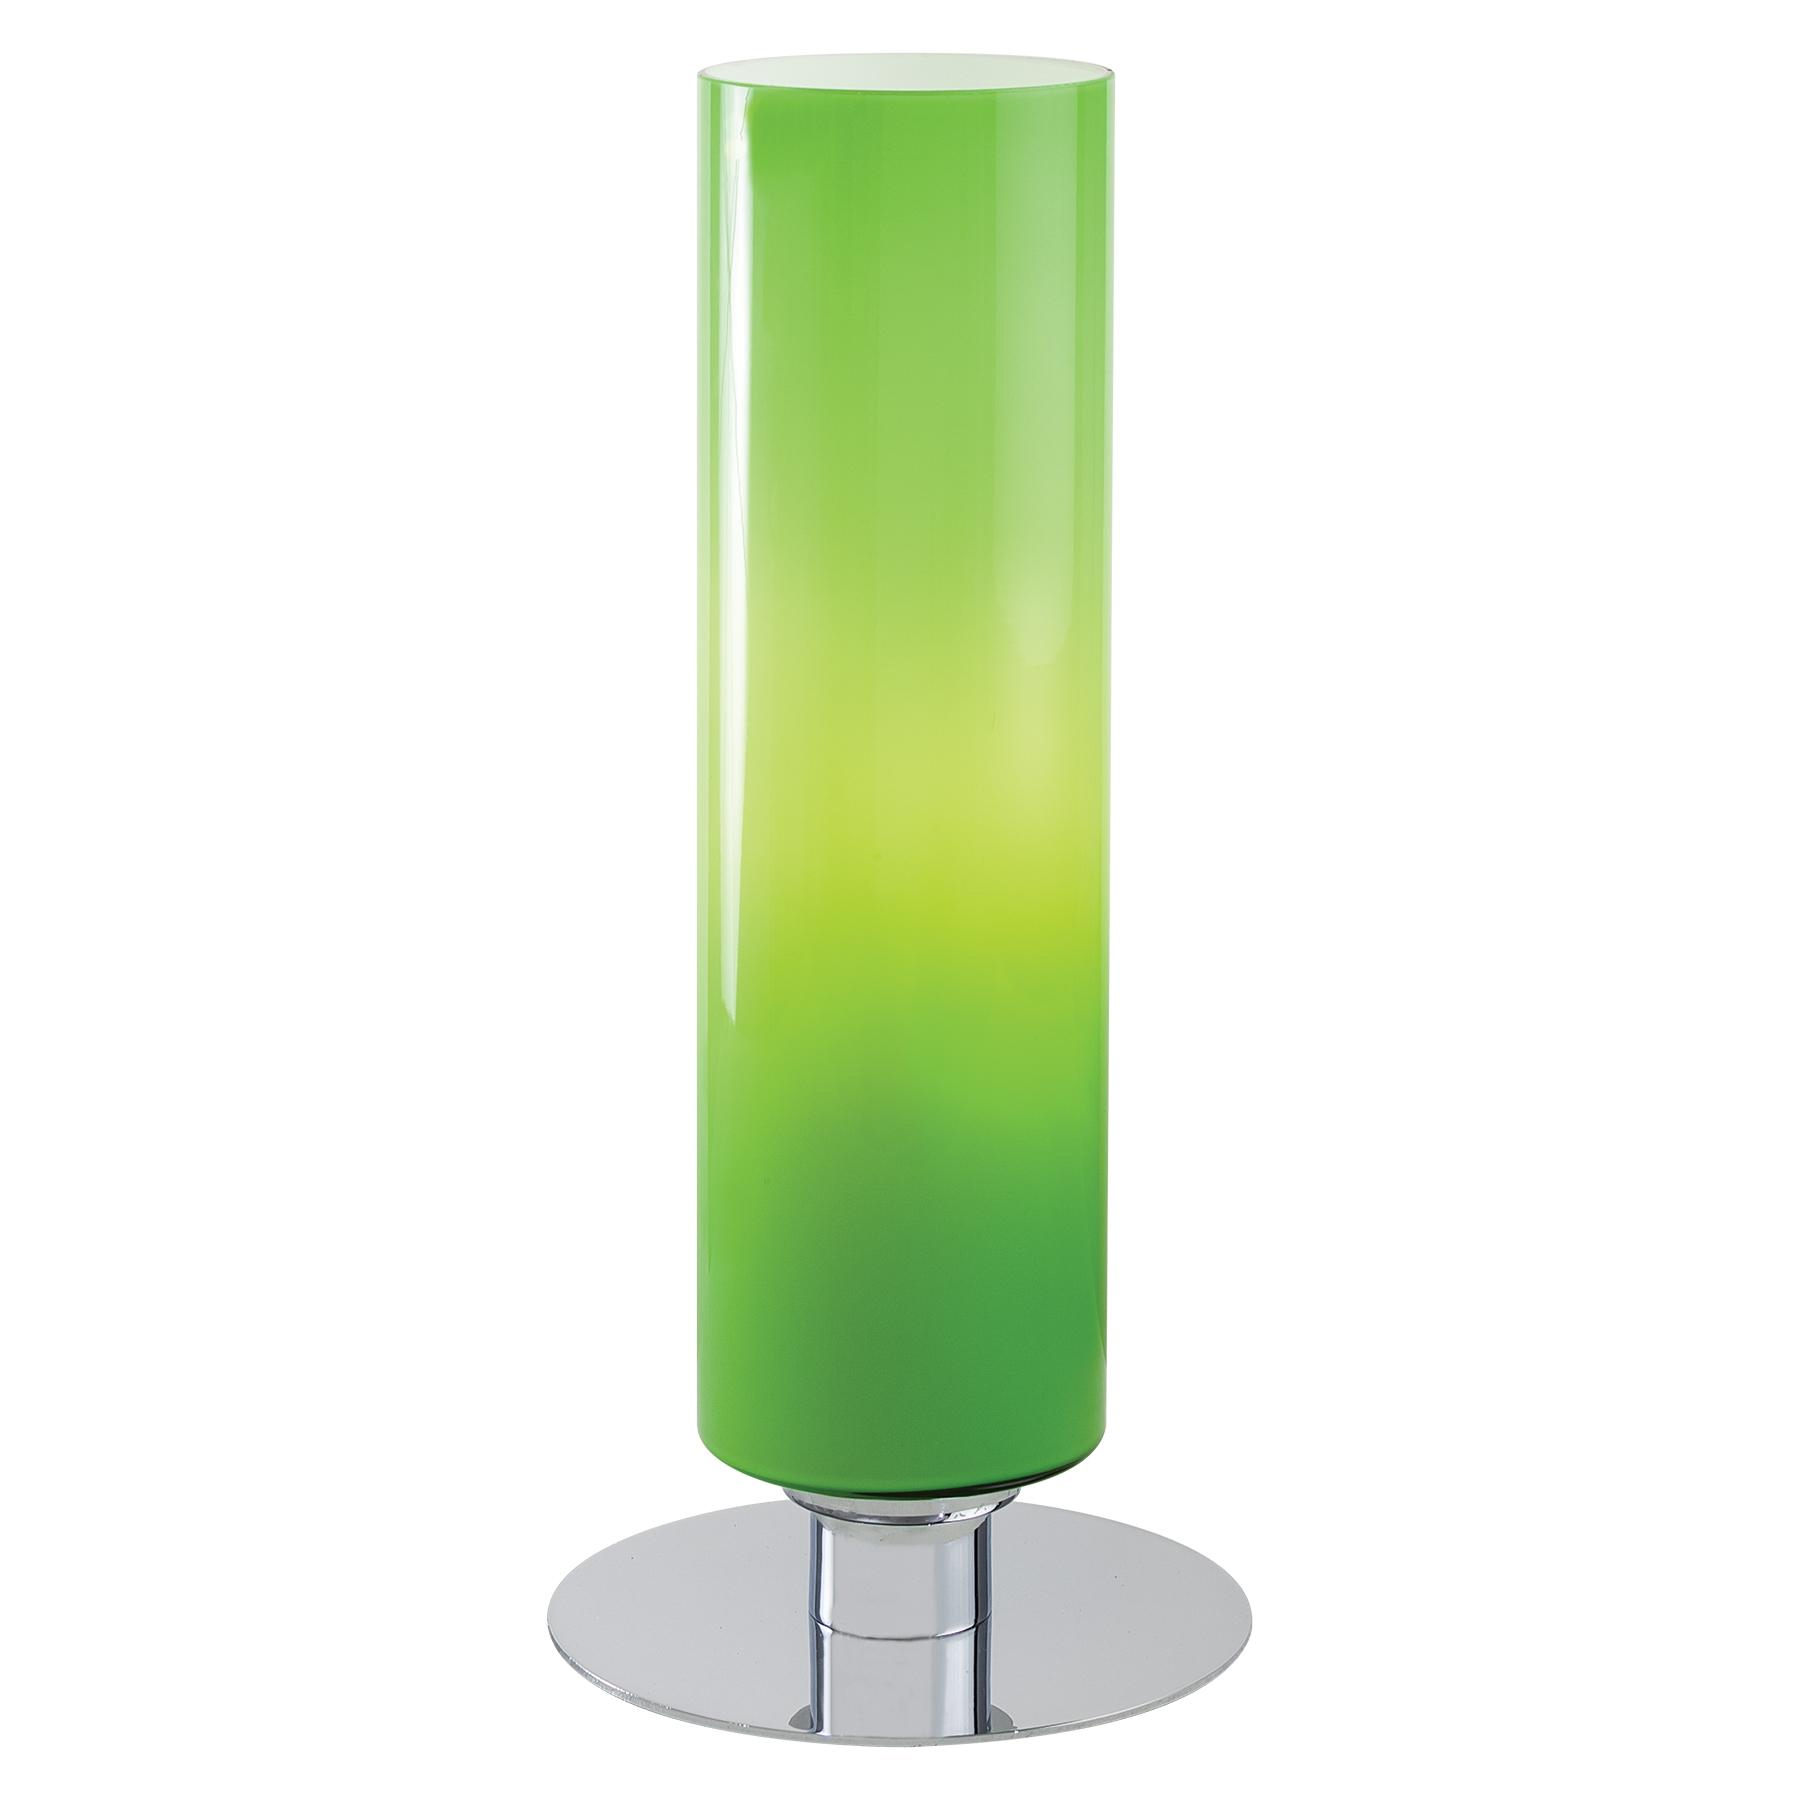 P663 Table Lamp By George Kovacs, George Kovacs Chrome Cylinder Table Lamp